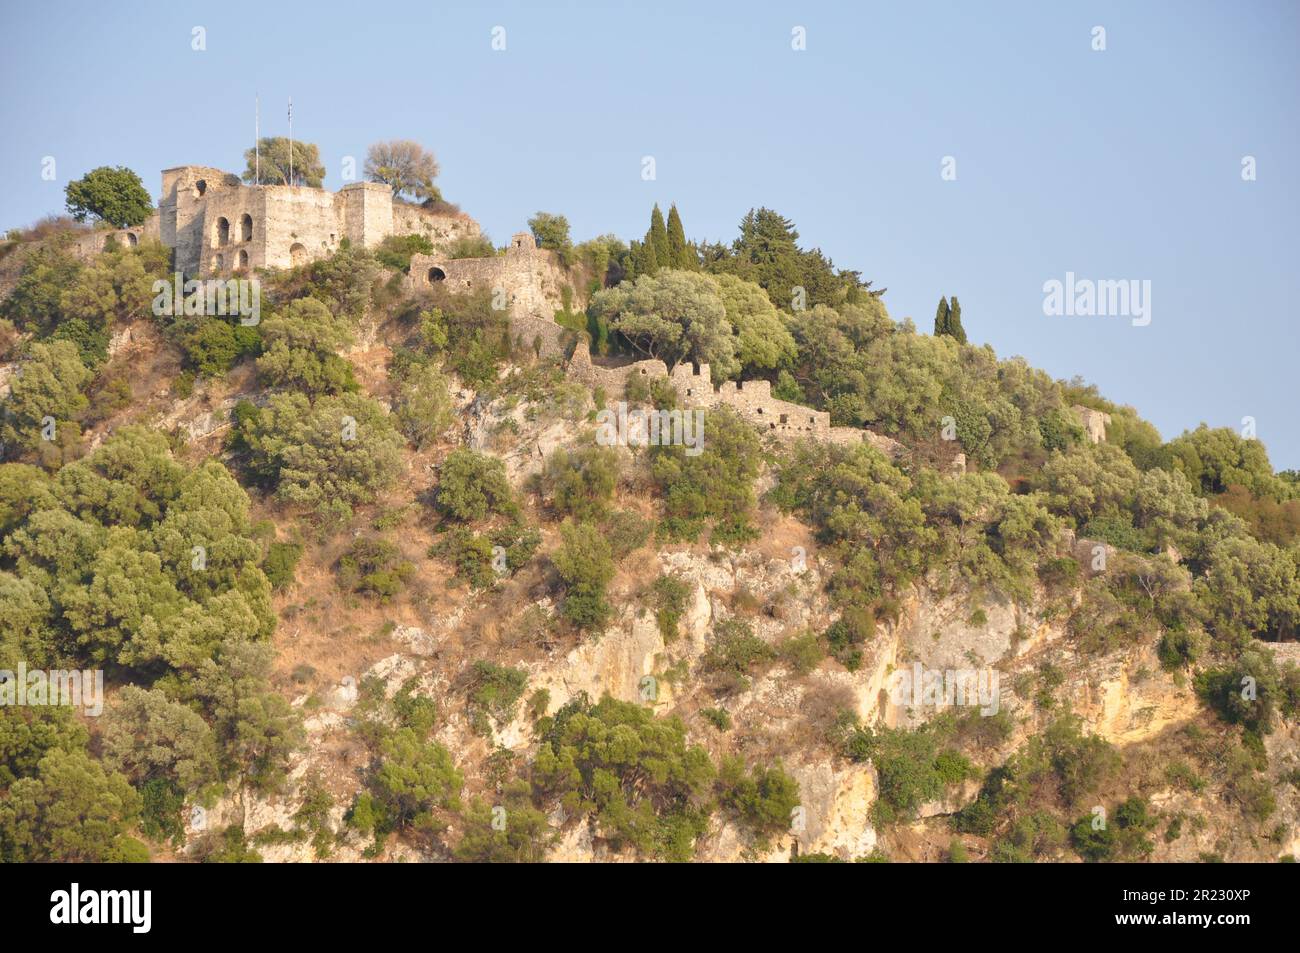 Beautiful Venetian castle in Parga Greece perched on top of a hill Stock Photo